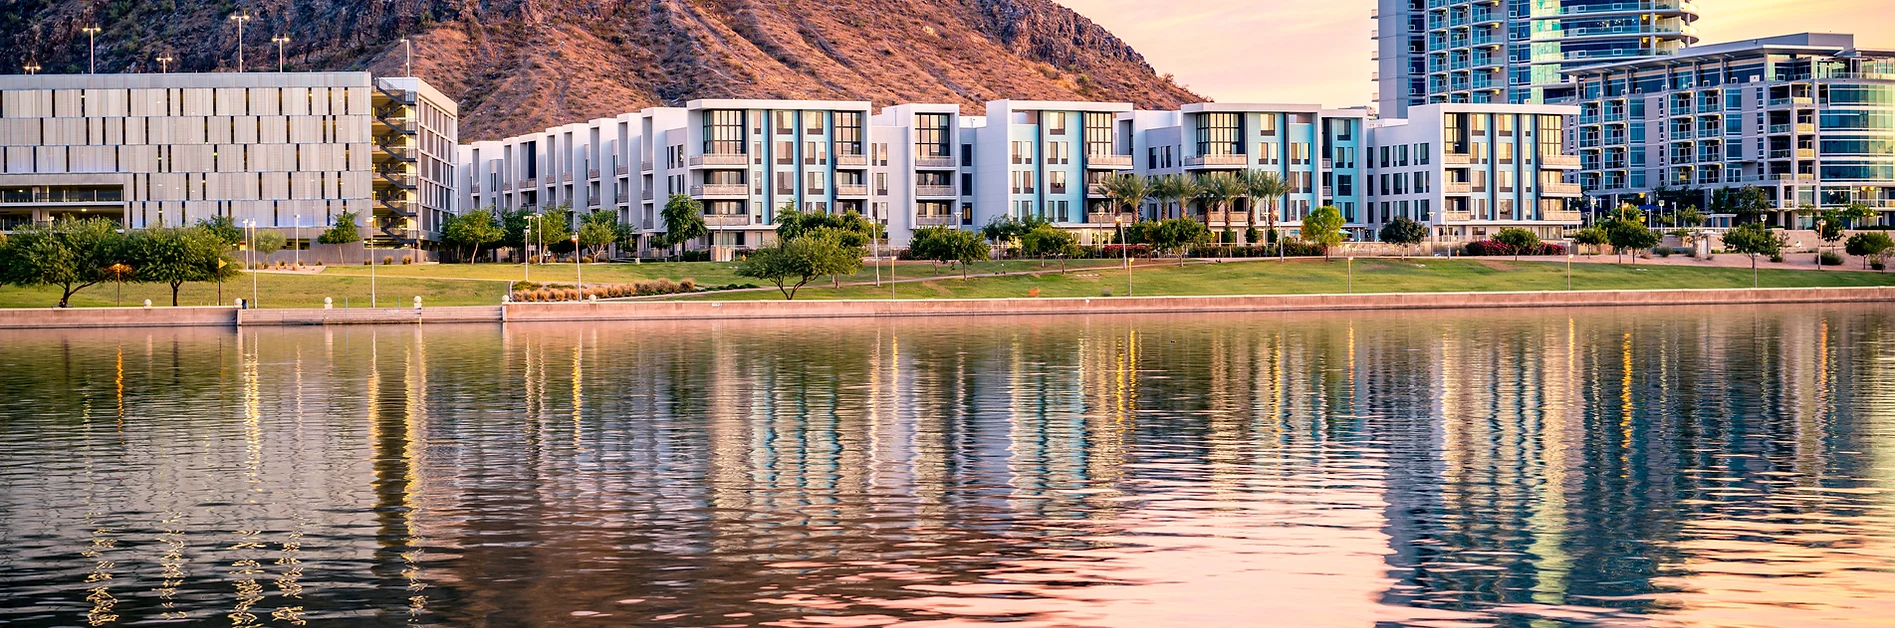 Tempe AZ Vacation Rentals - Things to Do in Tempe | Coast to Cactus